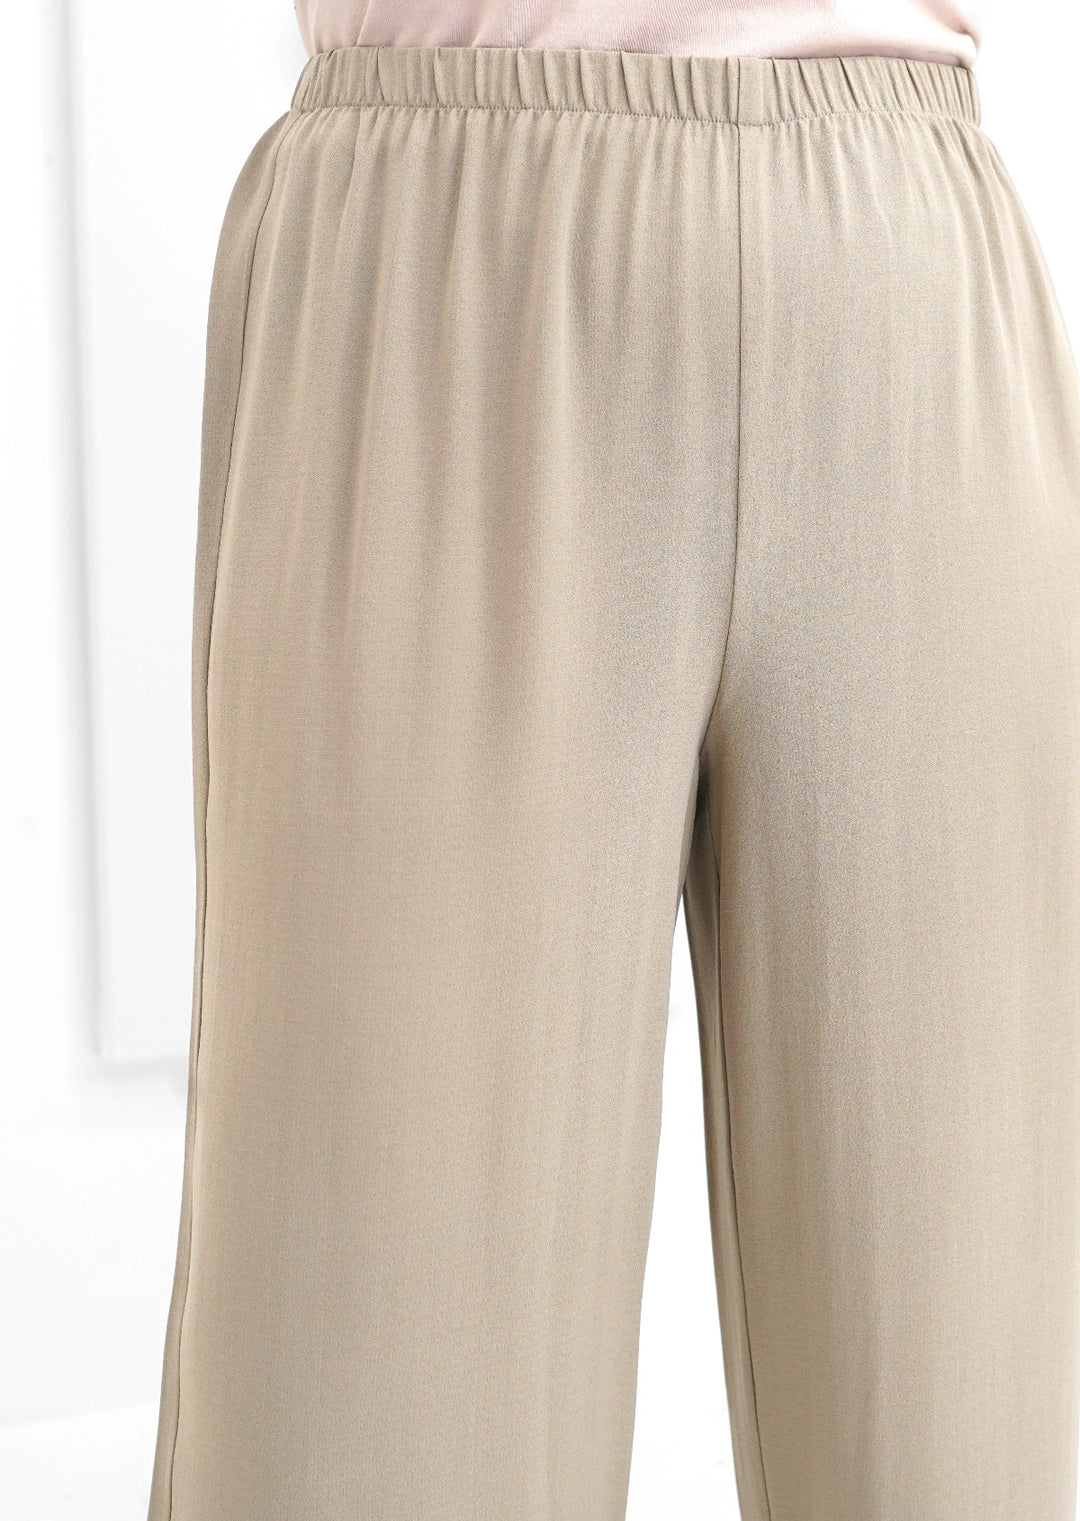 Eileen Fisher - Silk Georgette Crepe Straight Pant